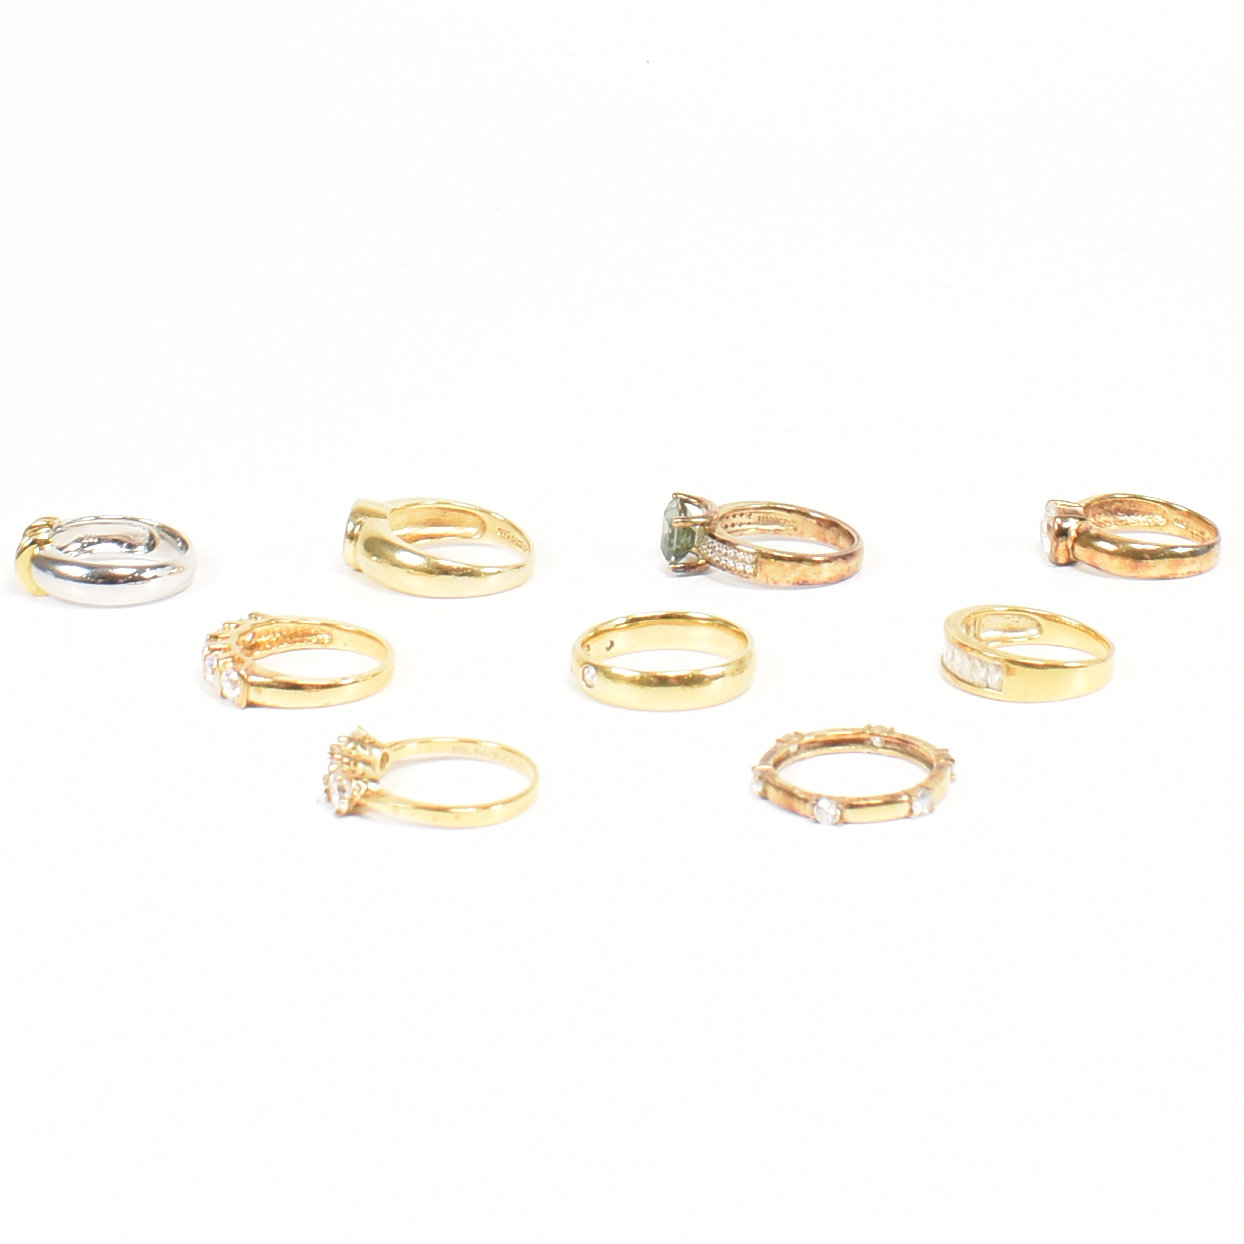 COLLECTION OF GOLD ON 925 SILVER CZ RINGS - Image 4 of 5